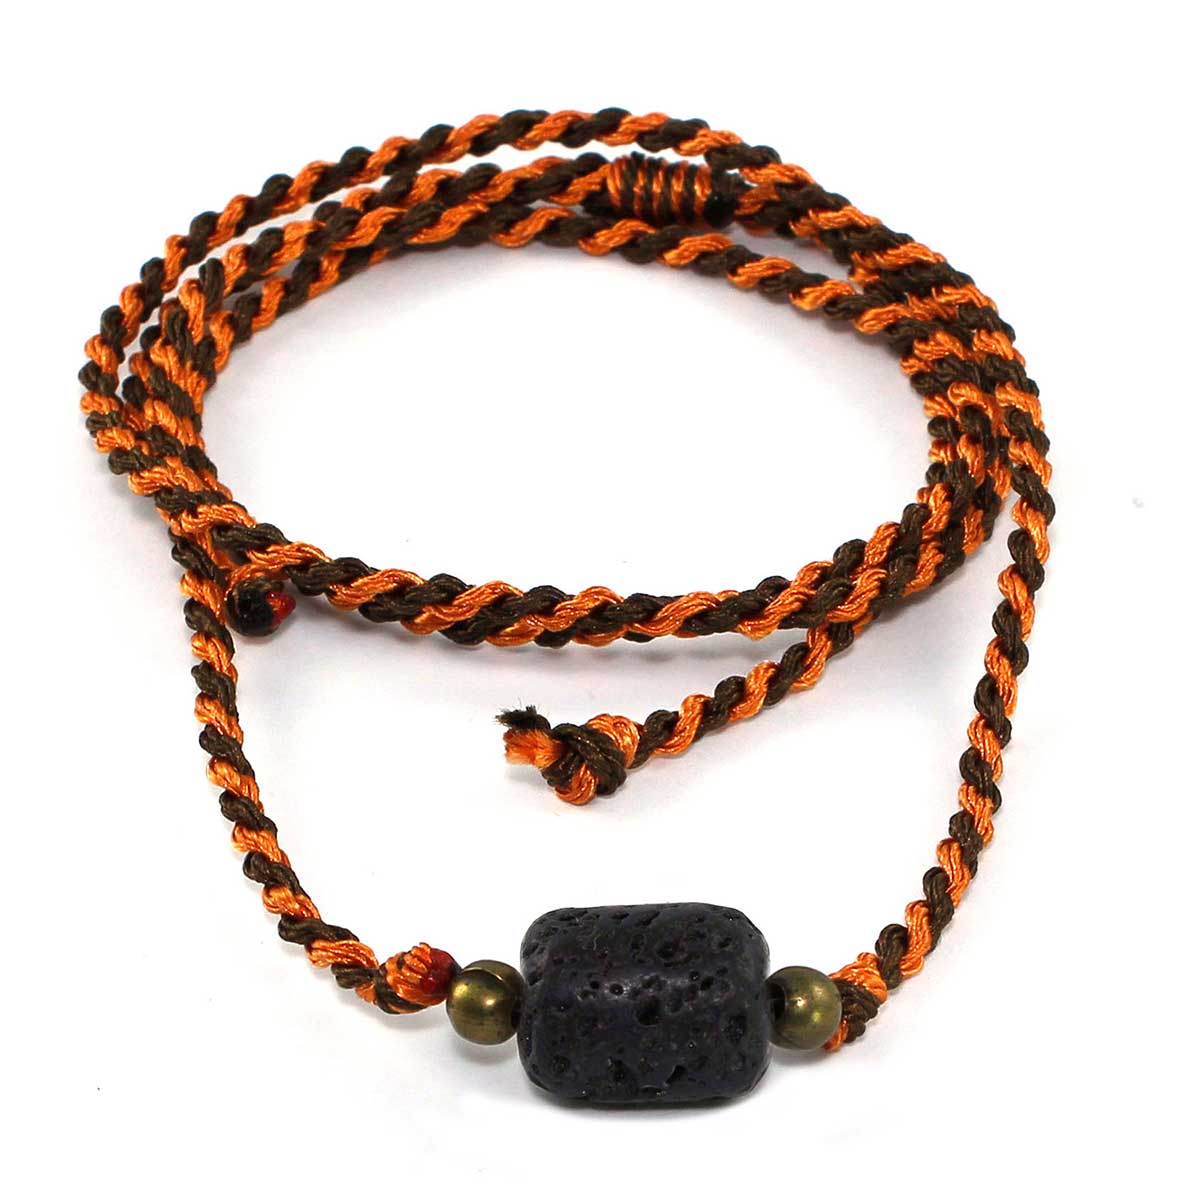 6 x Essential Oil Jewelry Necklaces /Bracelets with  1.5 ml vial of Orange Essential Oil.